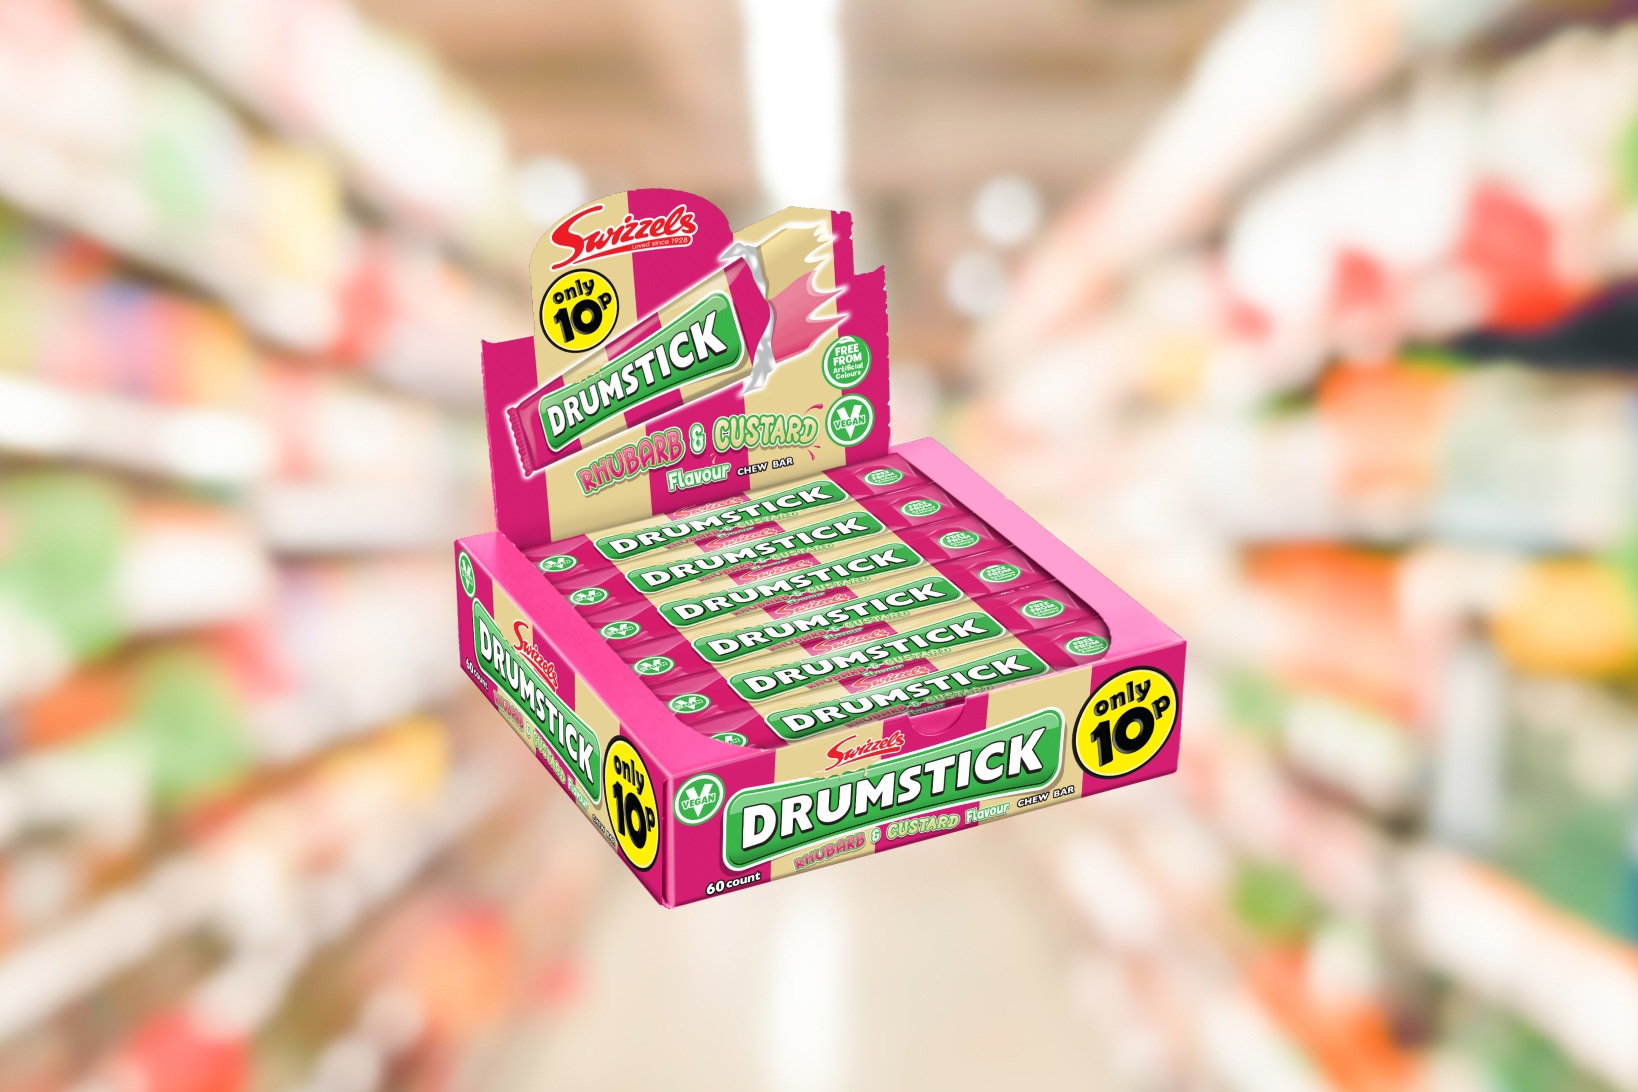 Swizzels Drumstick Rhubarb and Custard flavour